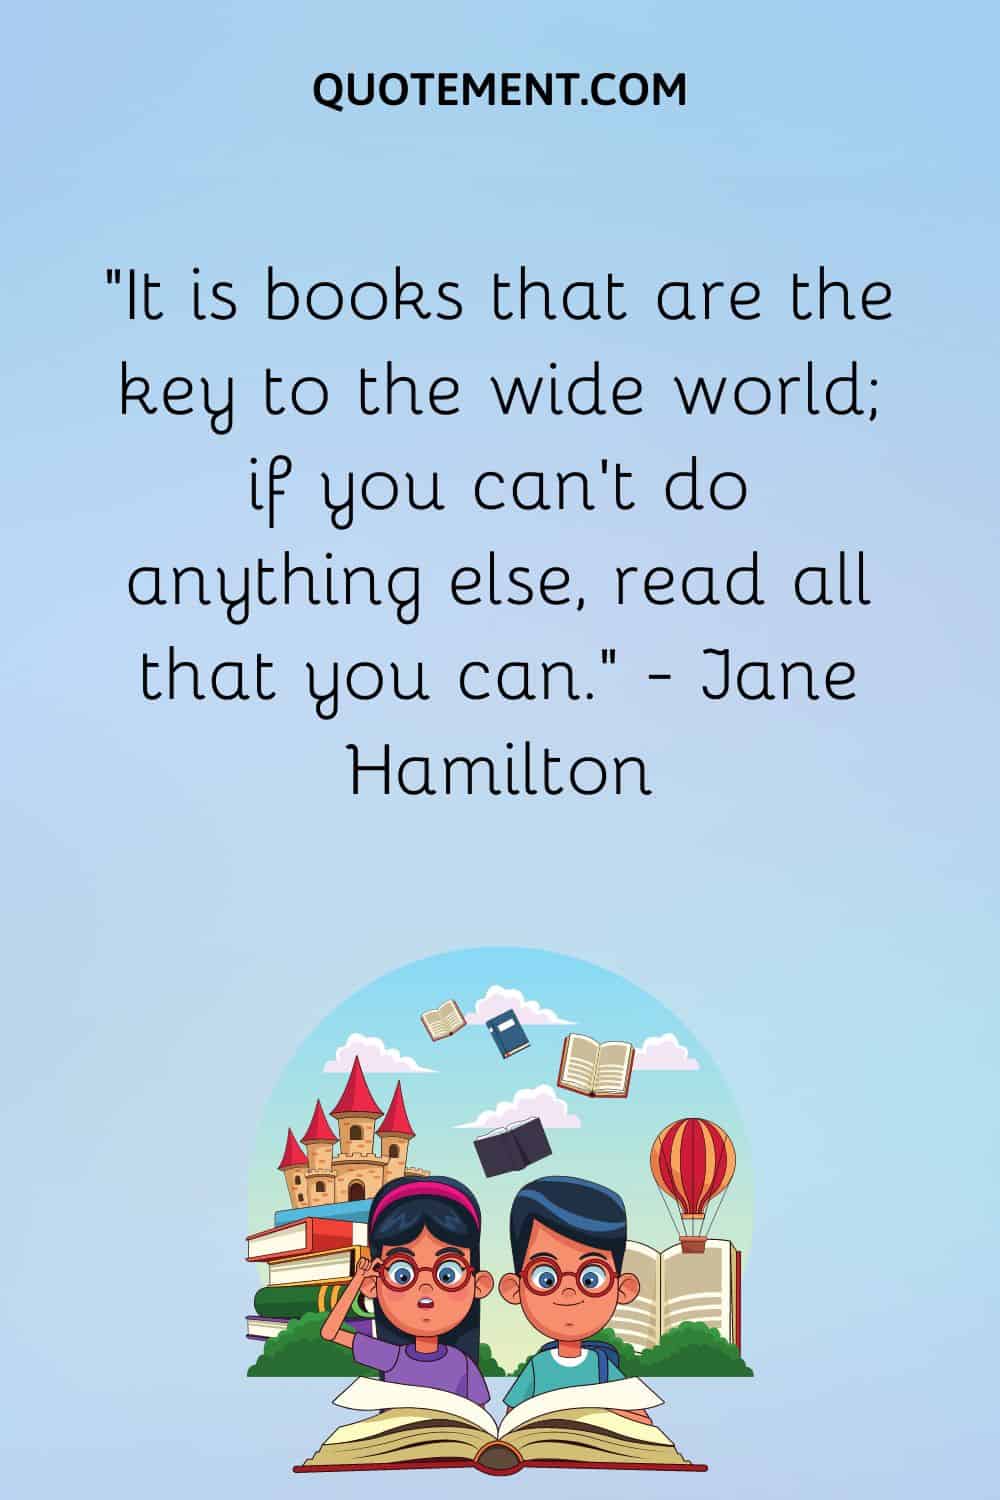 “It is books that are the key to the wide world; if you can’t do anything else, read all that you can.” — Jane Hamilton